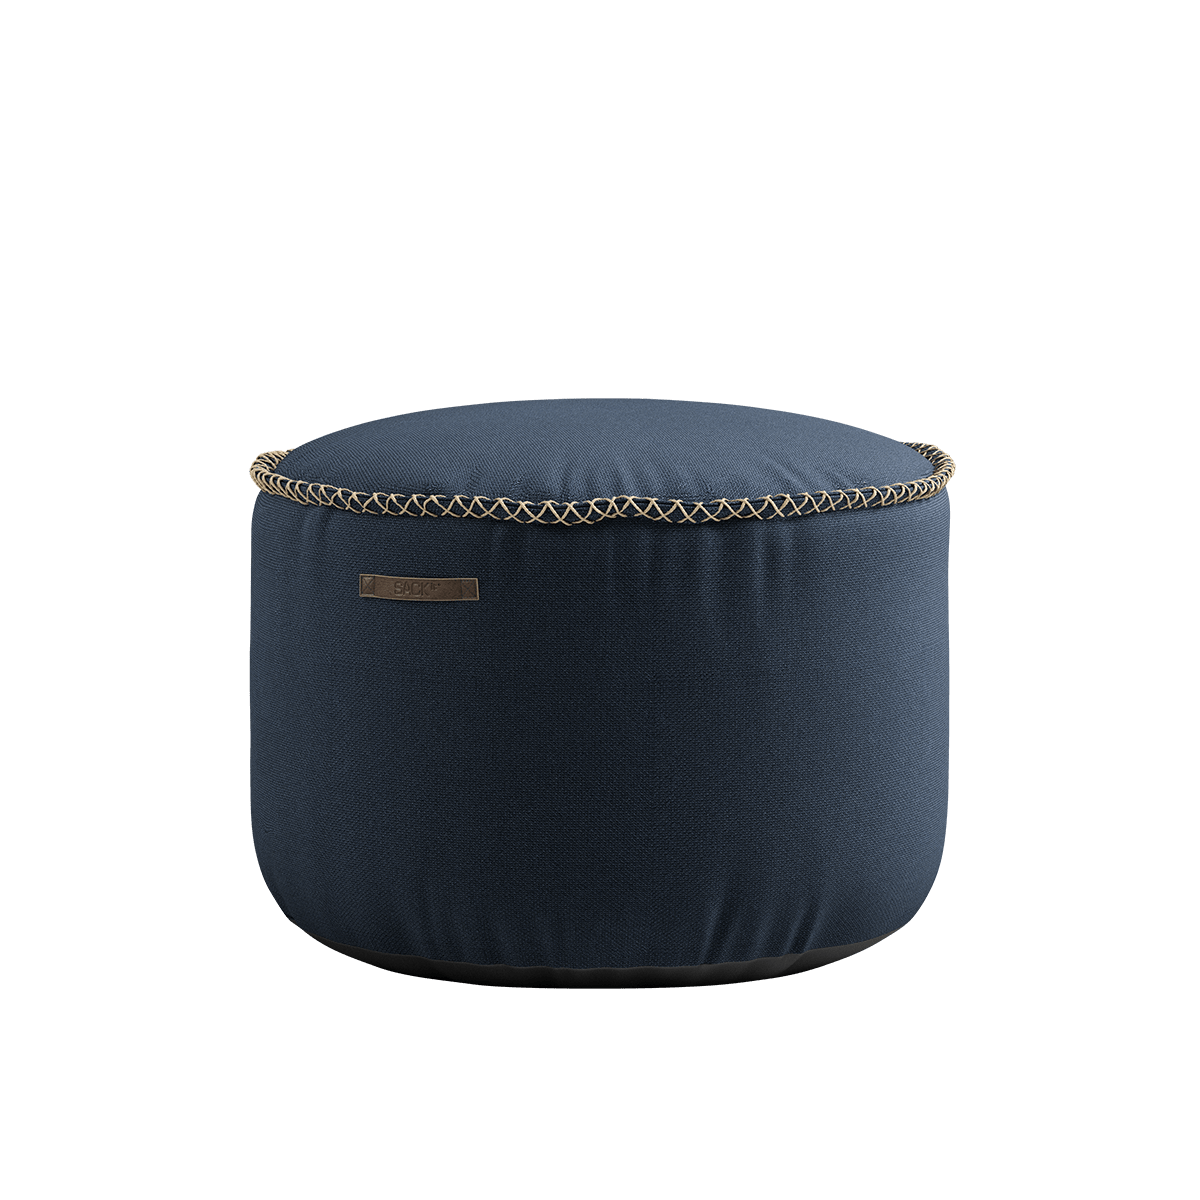 variant_8567151% | Cura Pouf [Contract] - Cura Dark Blue | SACKit